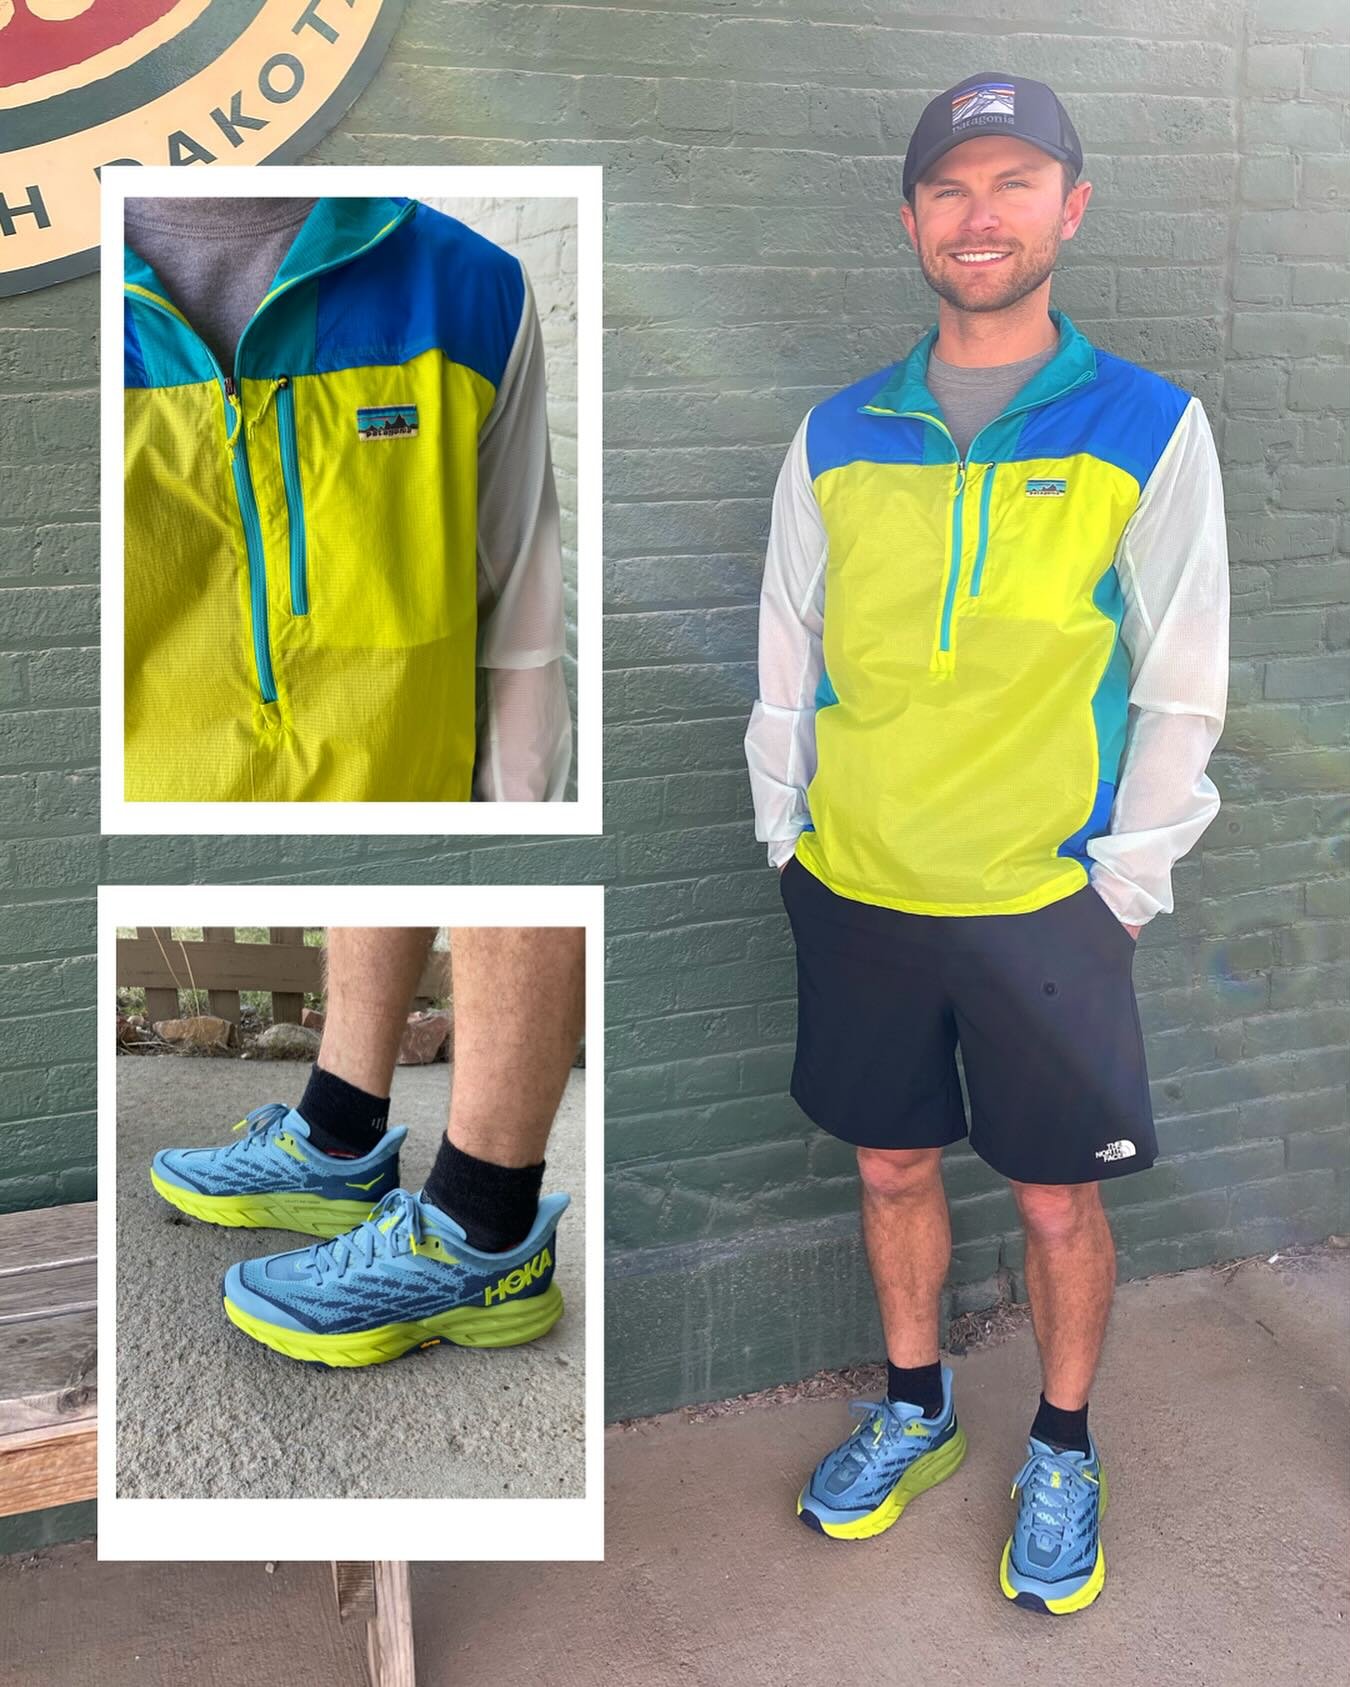 We think this sunshine means it&rsquo;s time for a wardrobe refresh! @elliott_anderson is wearing a @patagonia jacket and hat, shorts from @thenorthface, and the @hoka Speedgoats! 
#granitesports #springwardrobe #blackhills #patagonia #thenorthface #